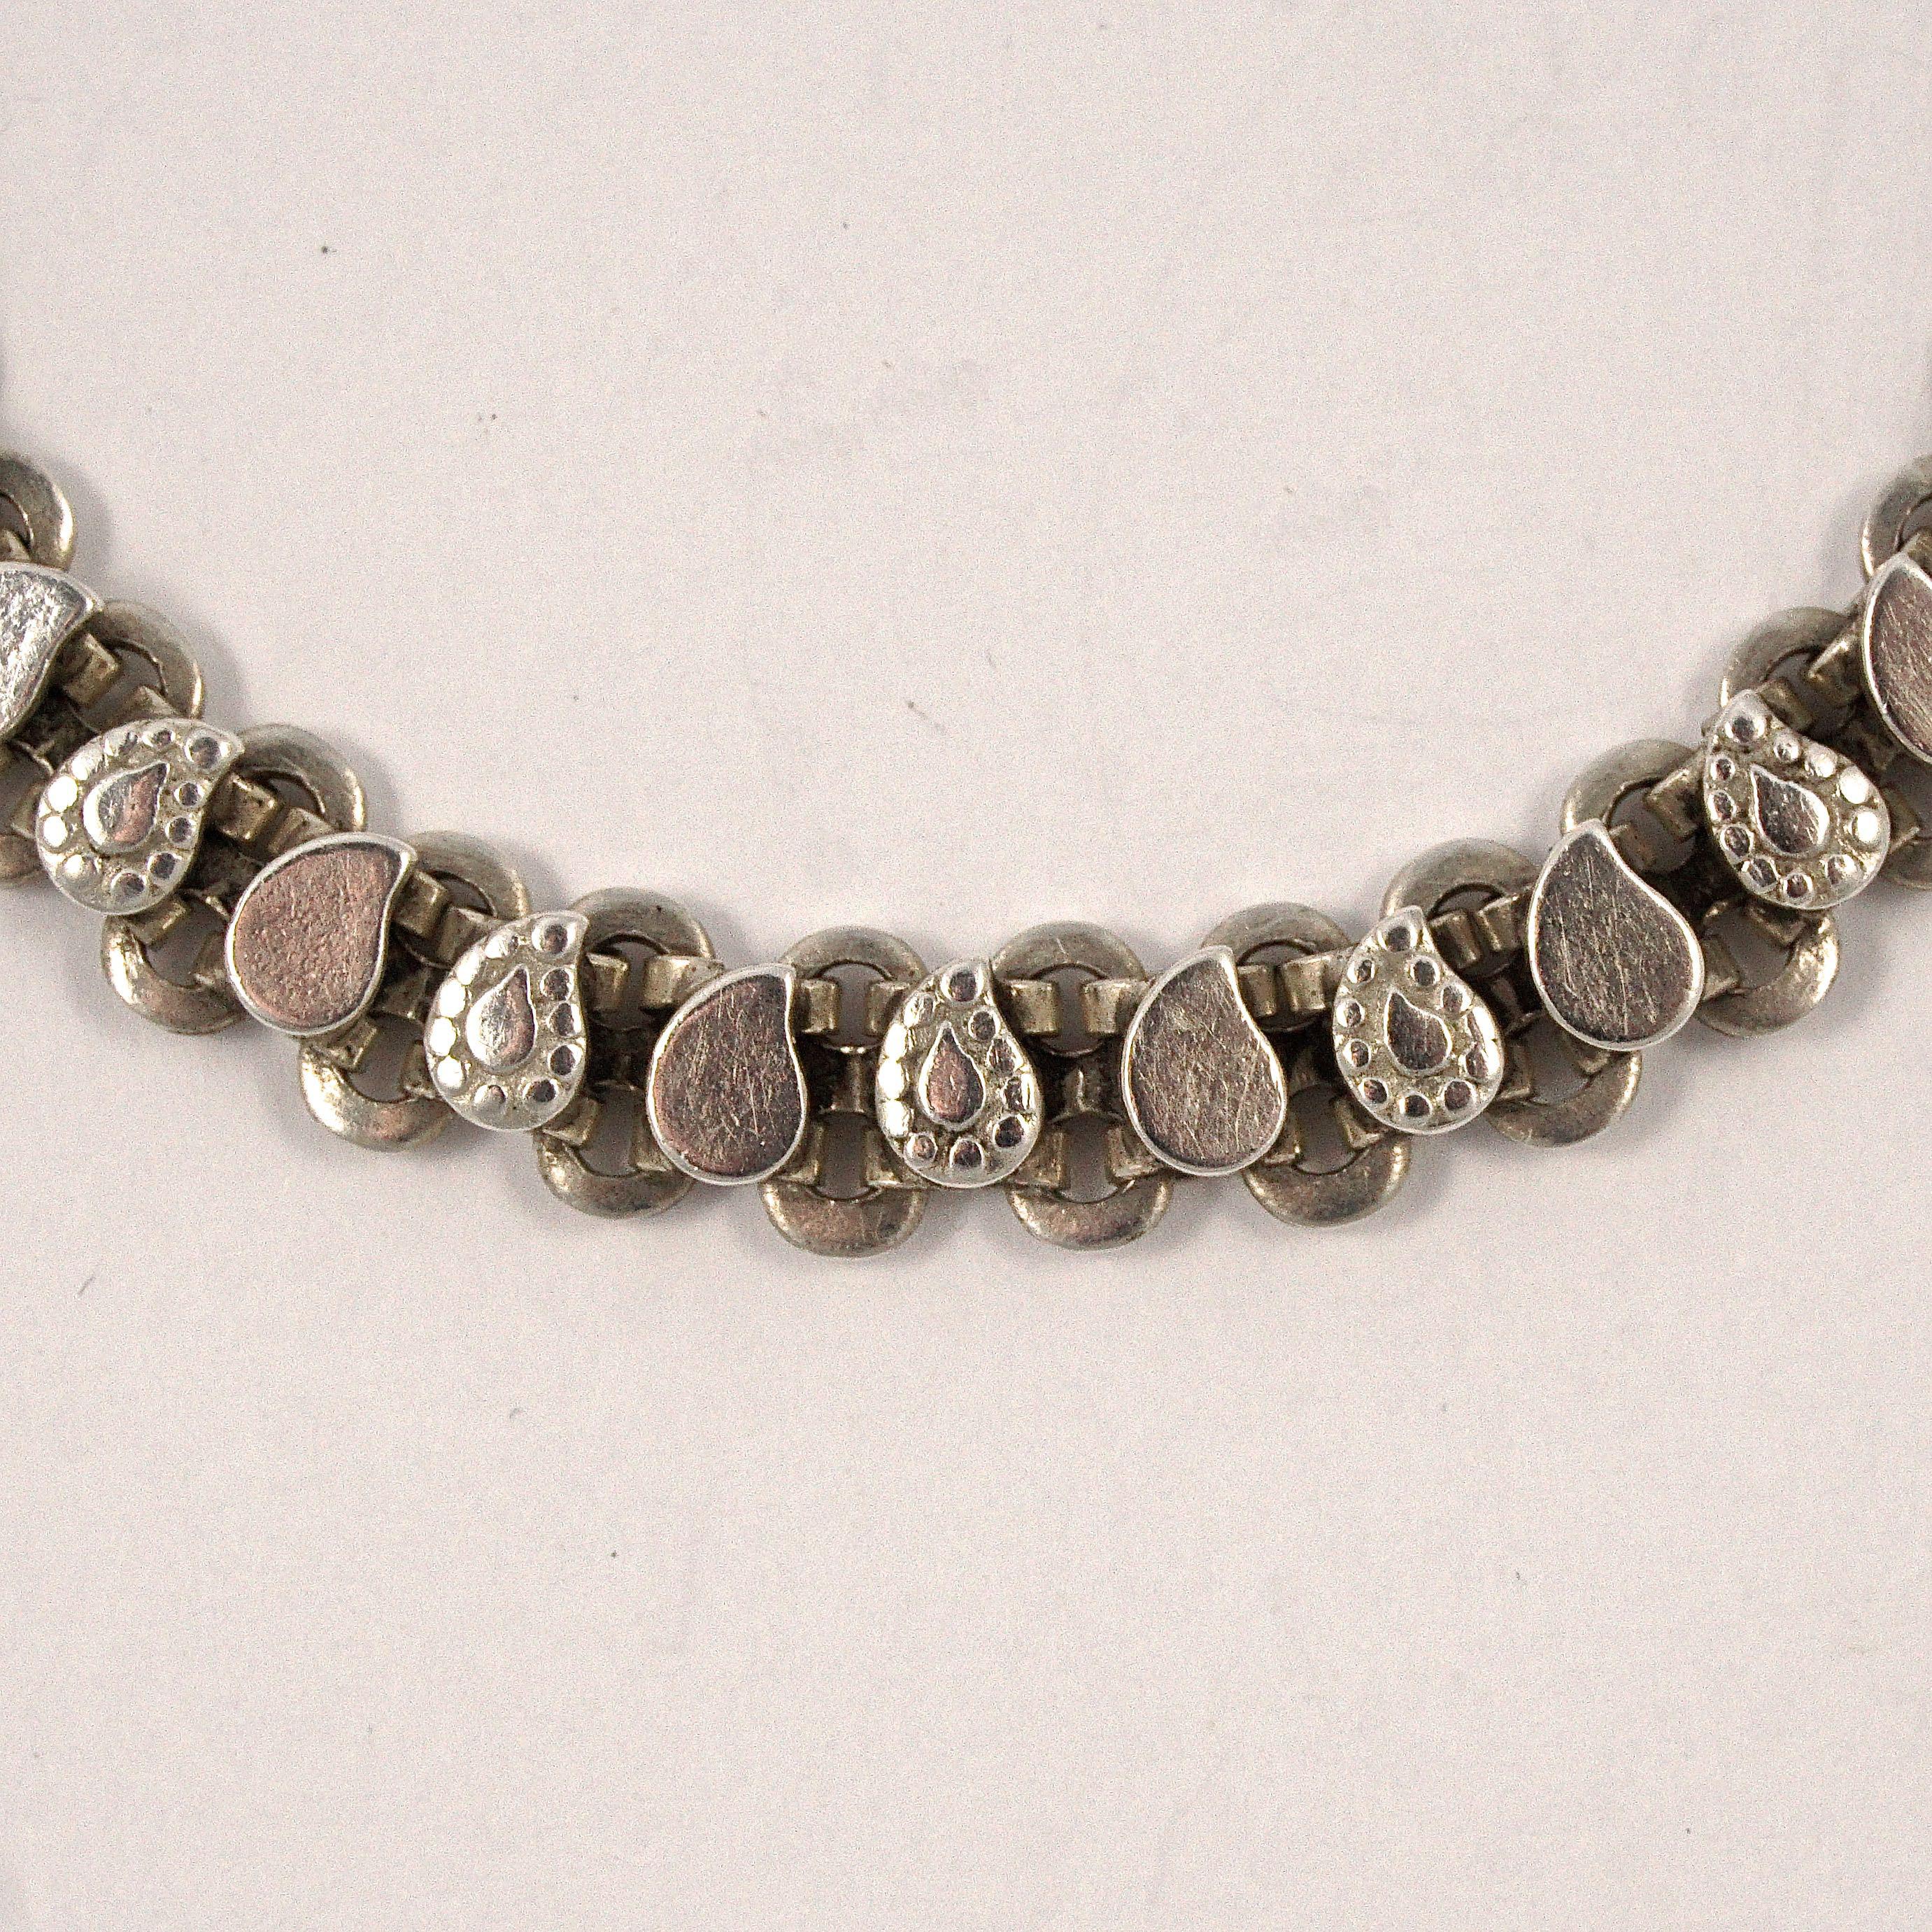 Rajasthan, India, silver chain bracelet with a simple hook fastening. The links have alternating smooth and patterned decorative links. The bracelet is stamped RA and tests for silver. Measuring length 20.3cm / 8 inches by width 7.75mm / .3